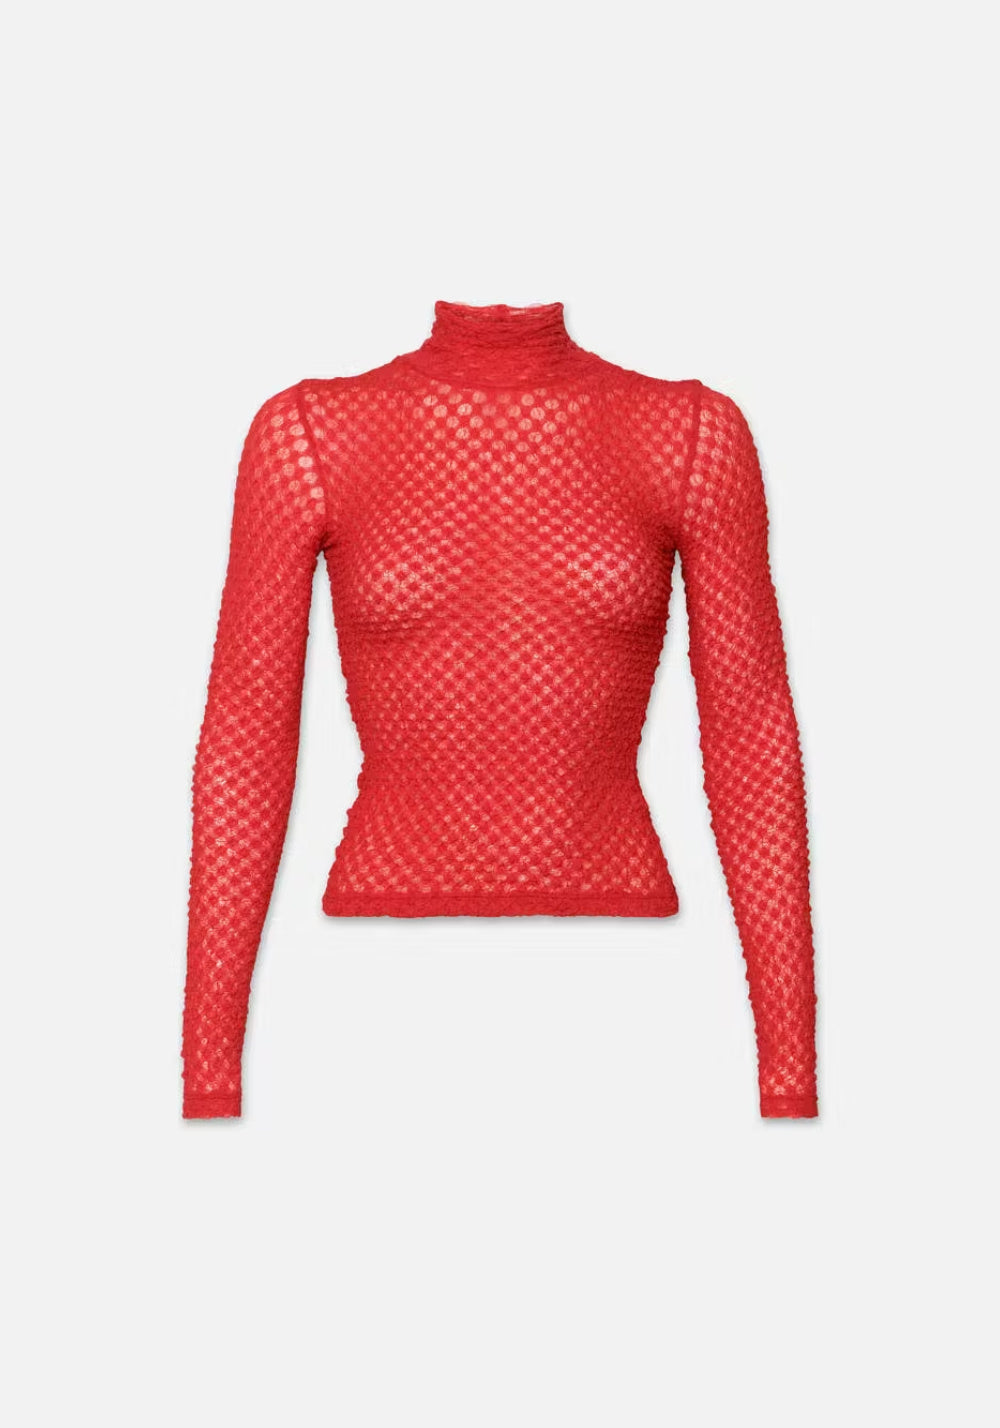 MESH LACE TURTLENECK (CHERRY RED) - FRAME